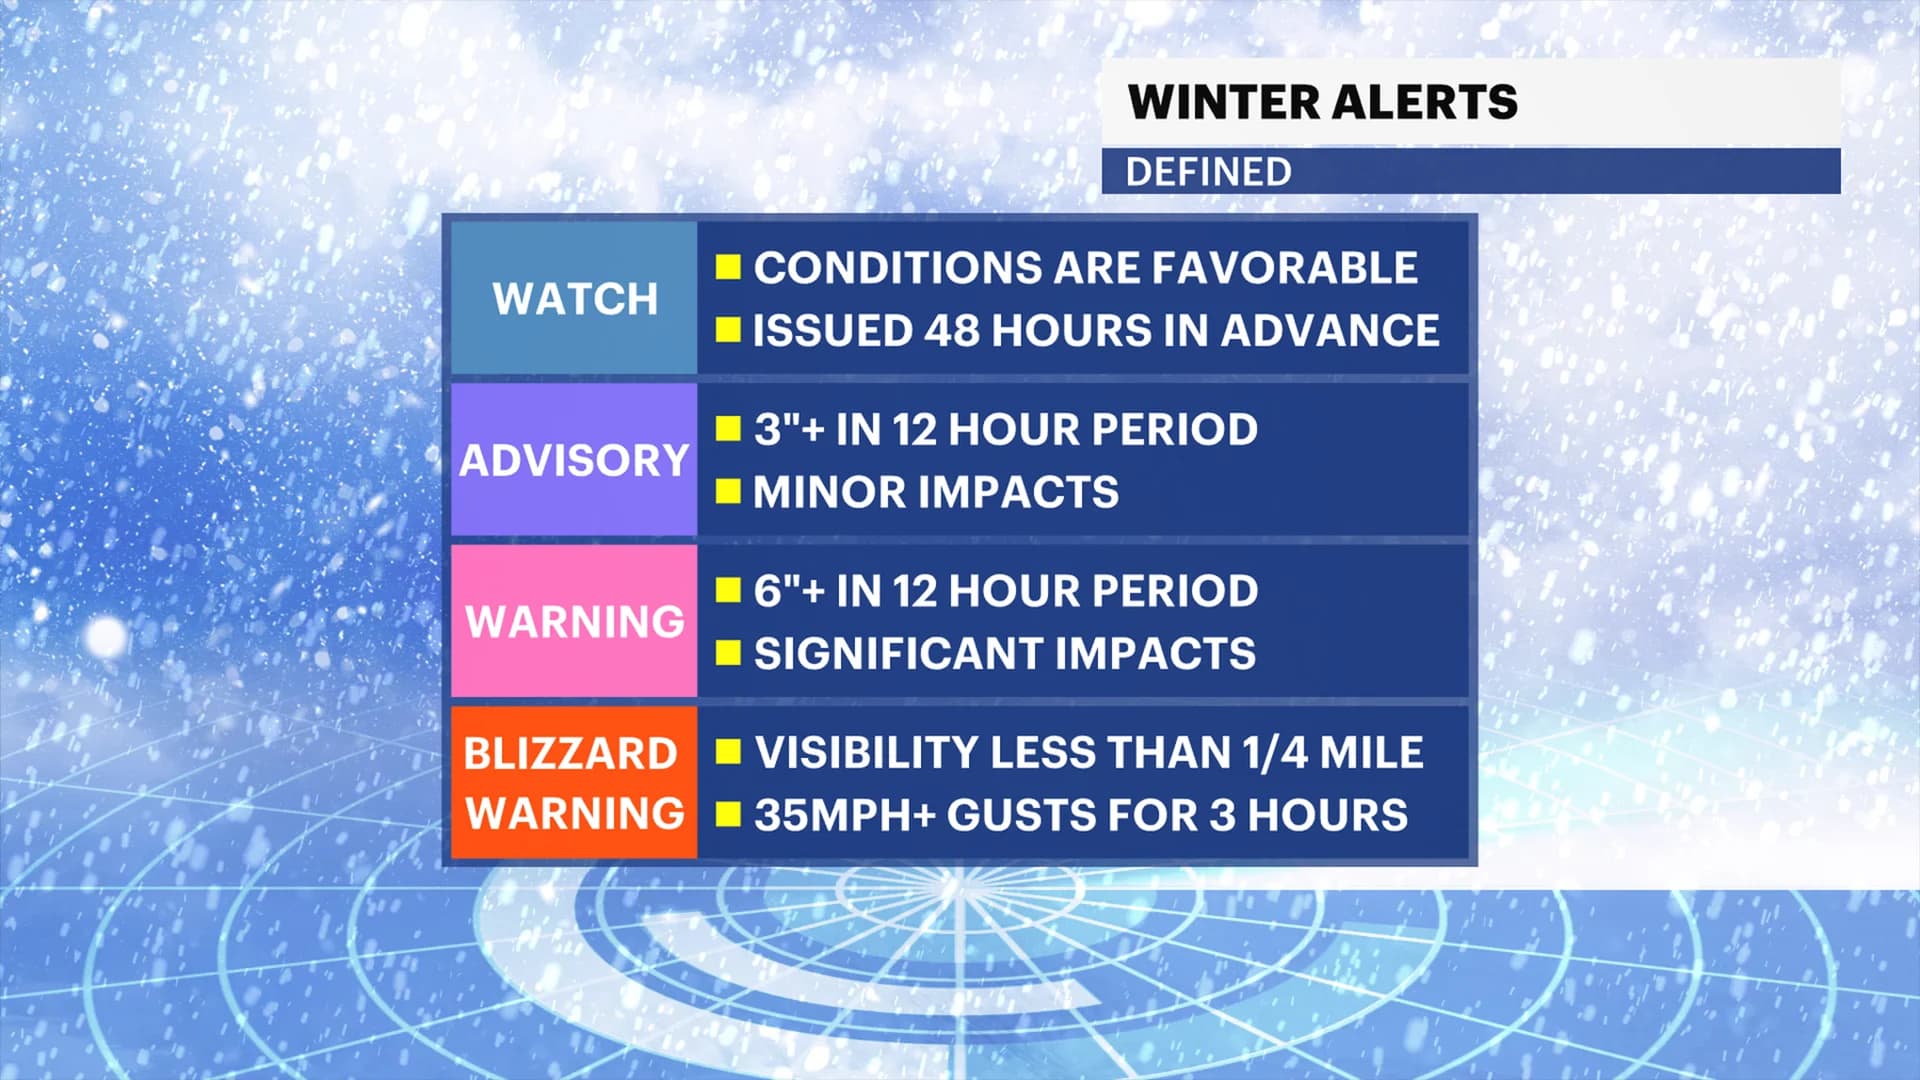 A watch, warning or advisory? What does it all mean when it comes to winter storms? Here's an explanation.